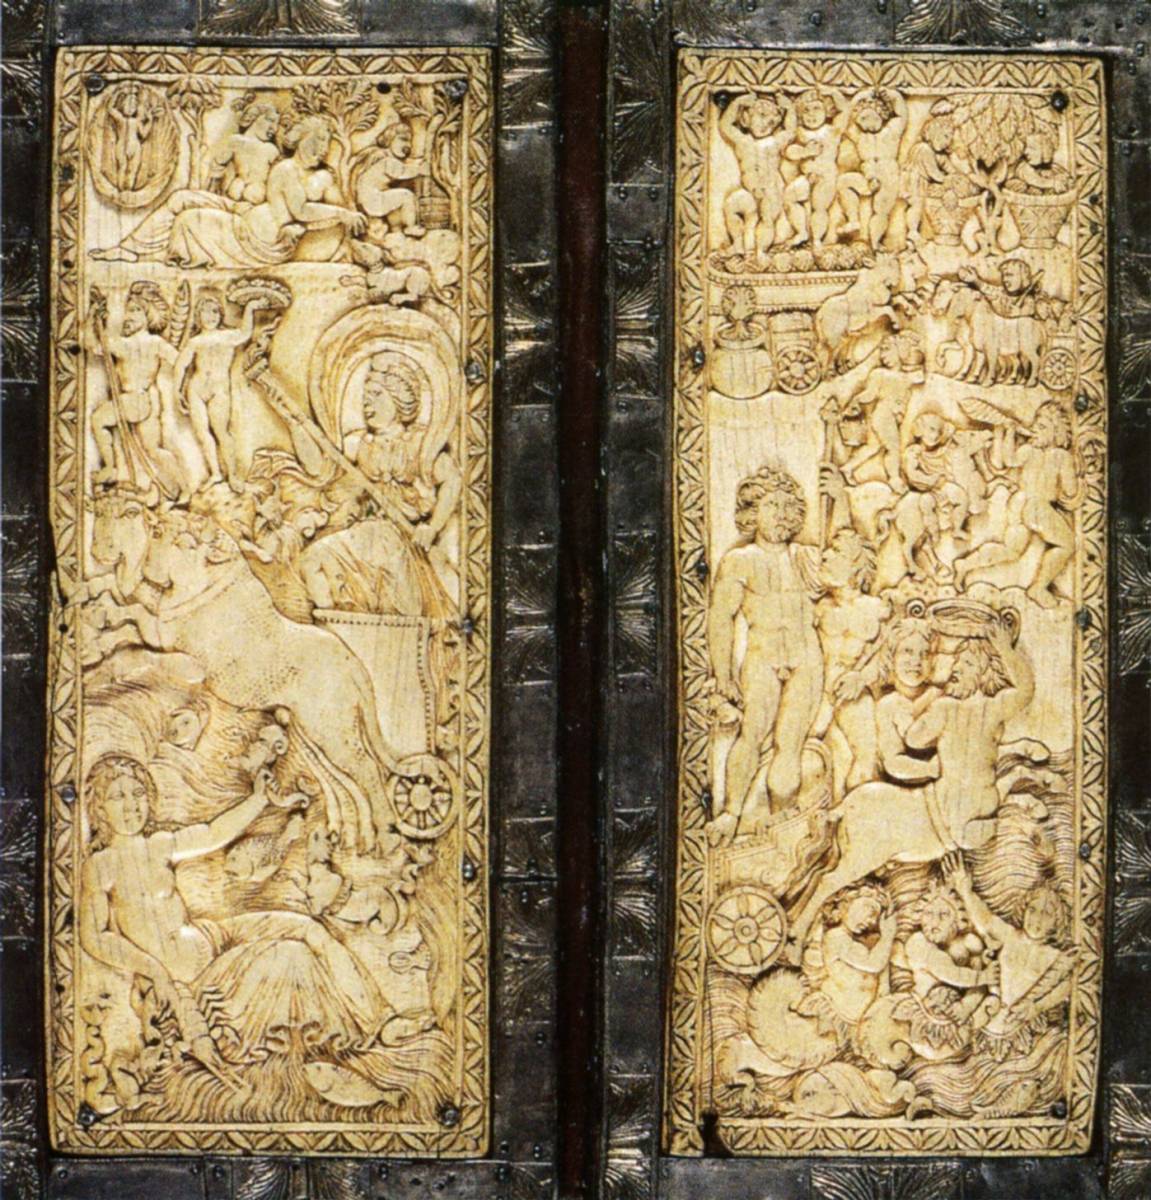 380%20Diptyque%20d%27ivoire,%20Dionysos%20et%20Selene,%20Sens%20Ivory%20diptych,%20Dionysos%20and%20Selene,%20Direction.jpg